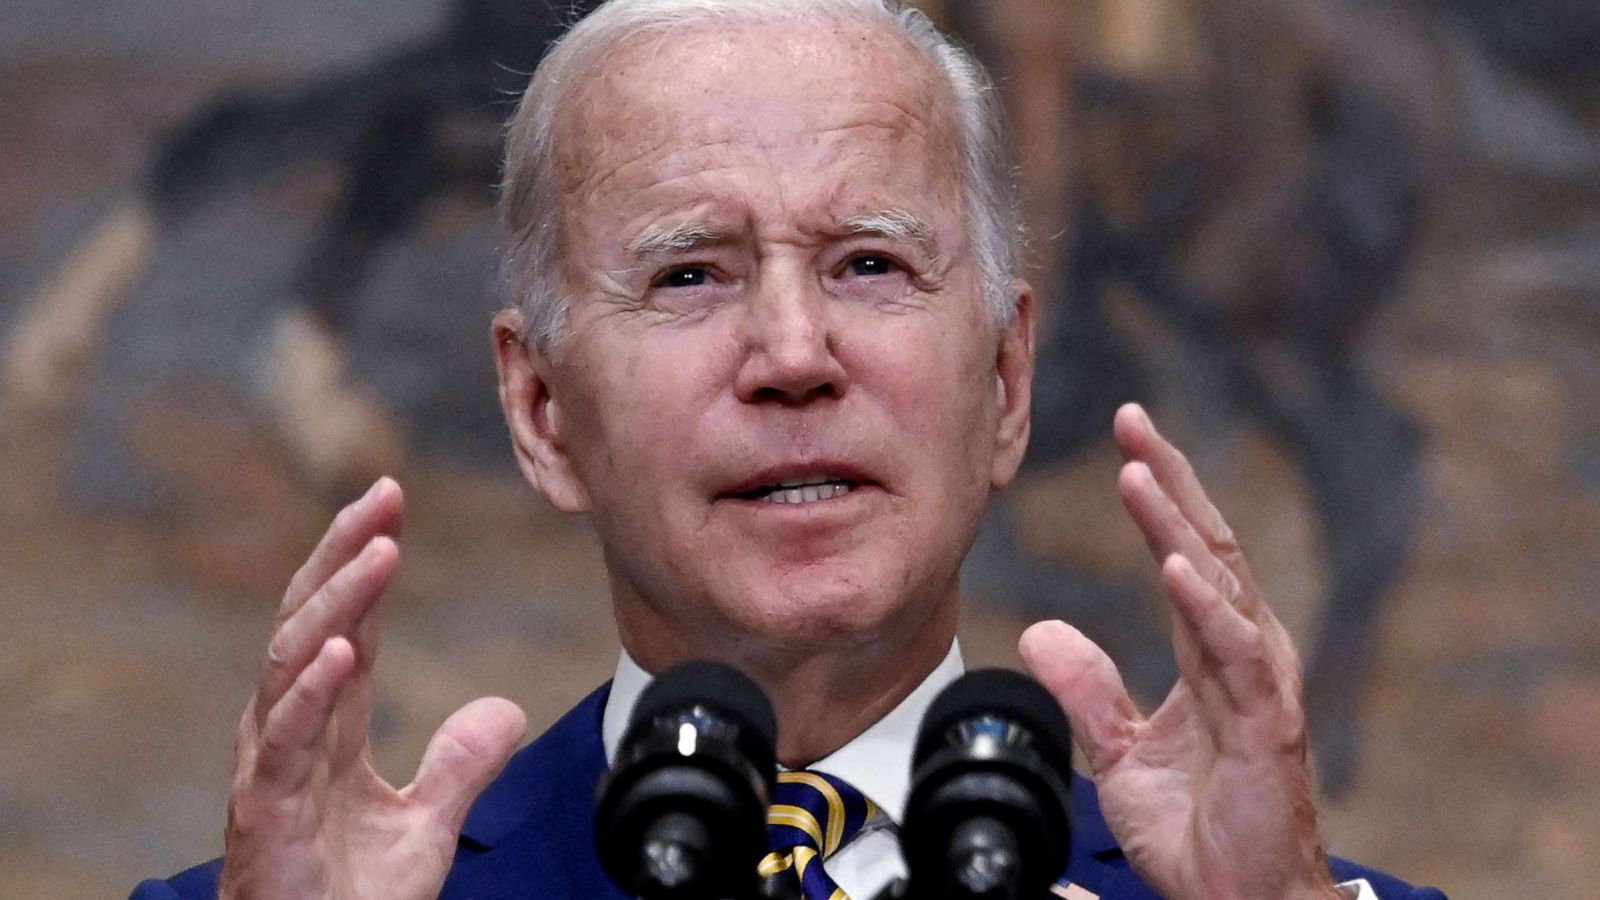 Biden’s student loan relief could cost $400 billion, Congressional Budget Office says -government.vision